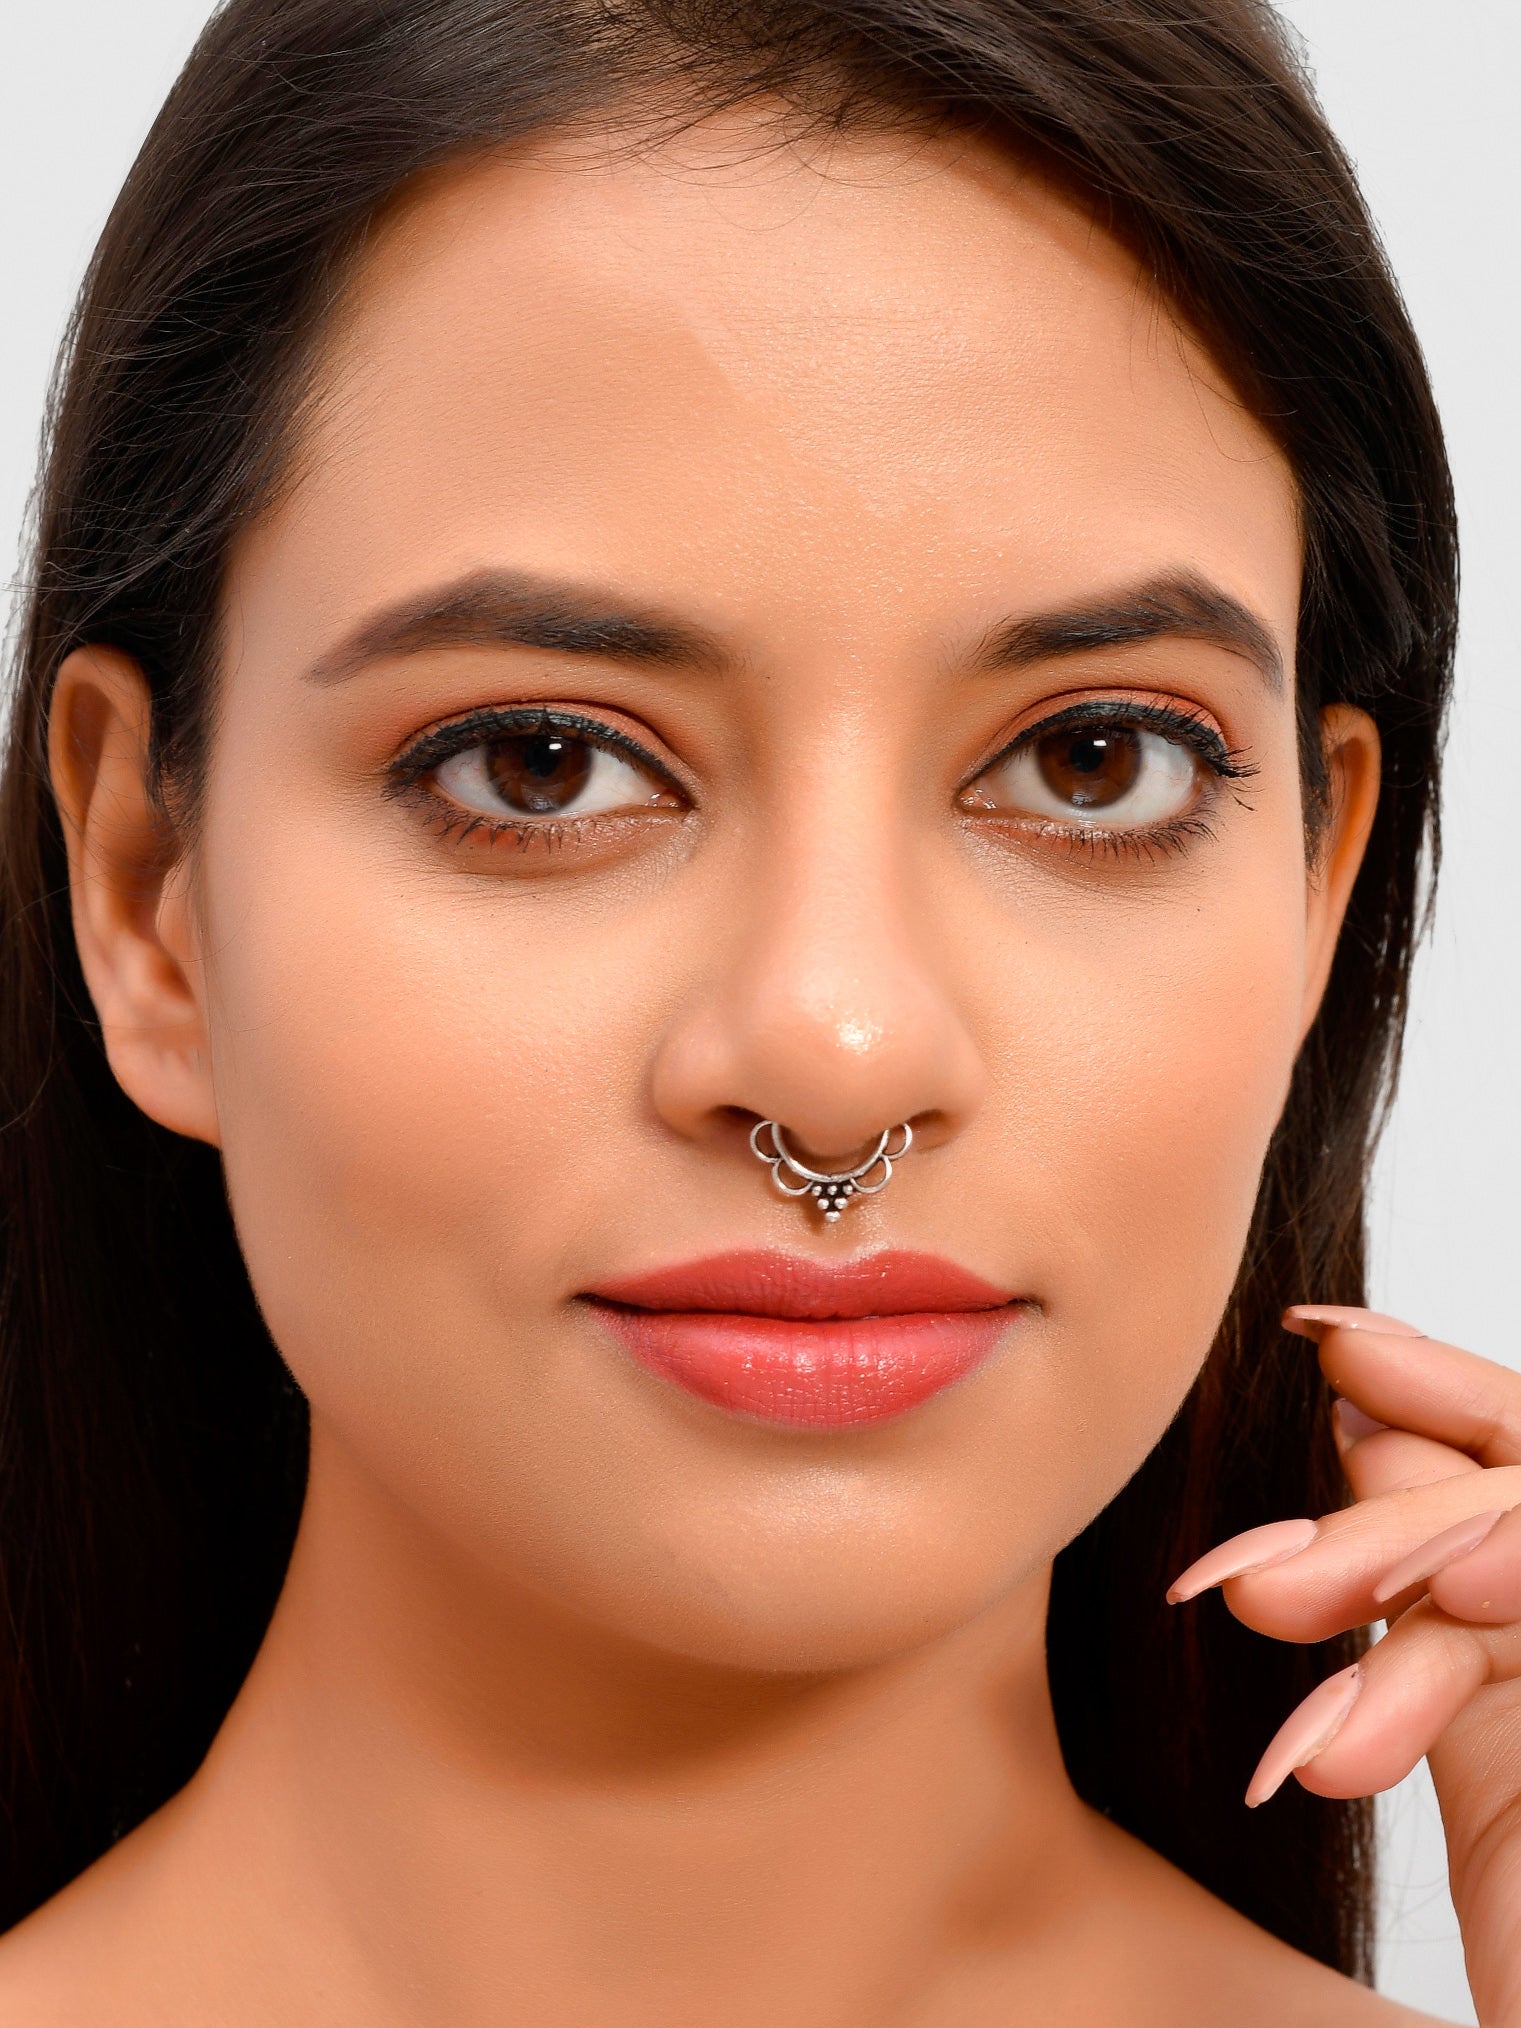 Beautiful Star Solid Sterling Silver Oxidized Nose Stud Twist nose ring L  Bend | eBay